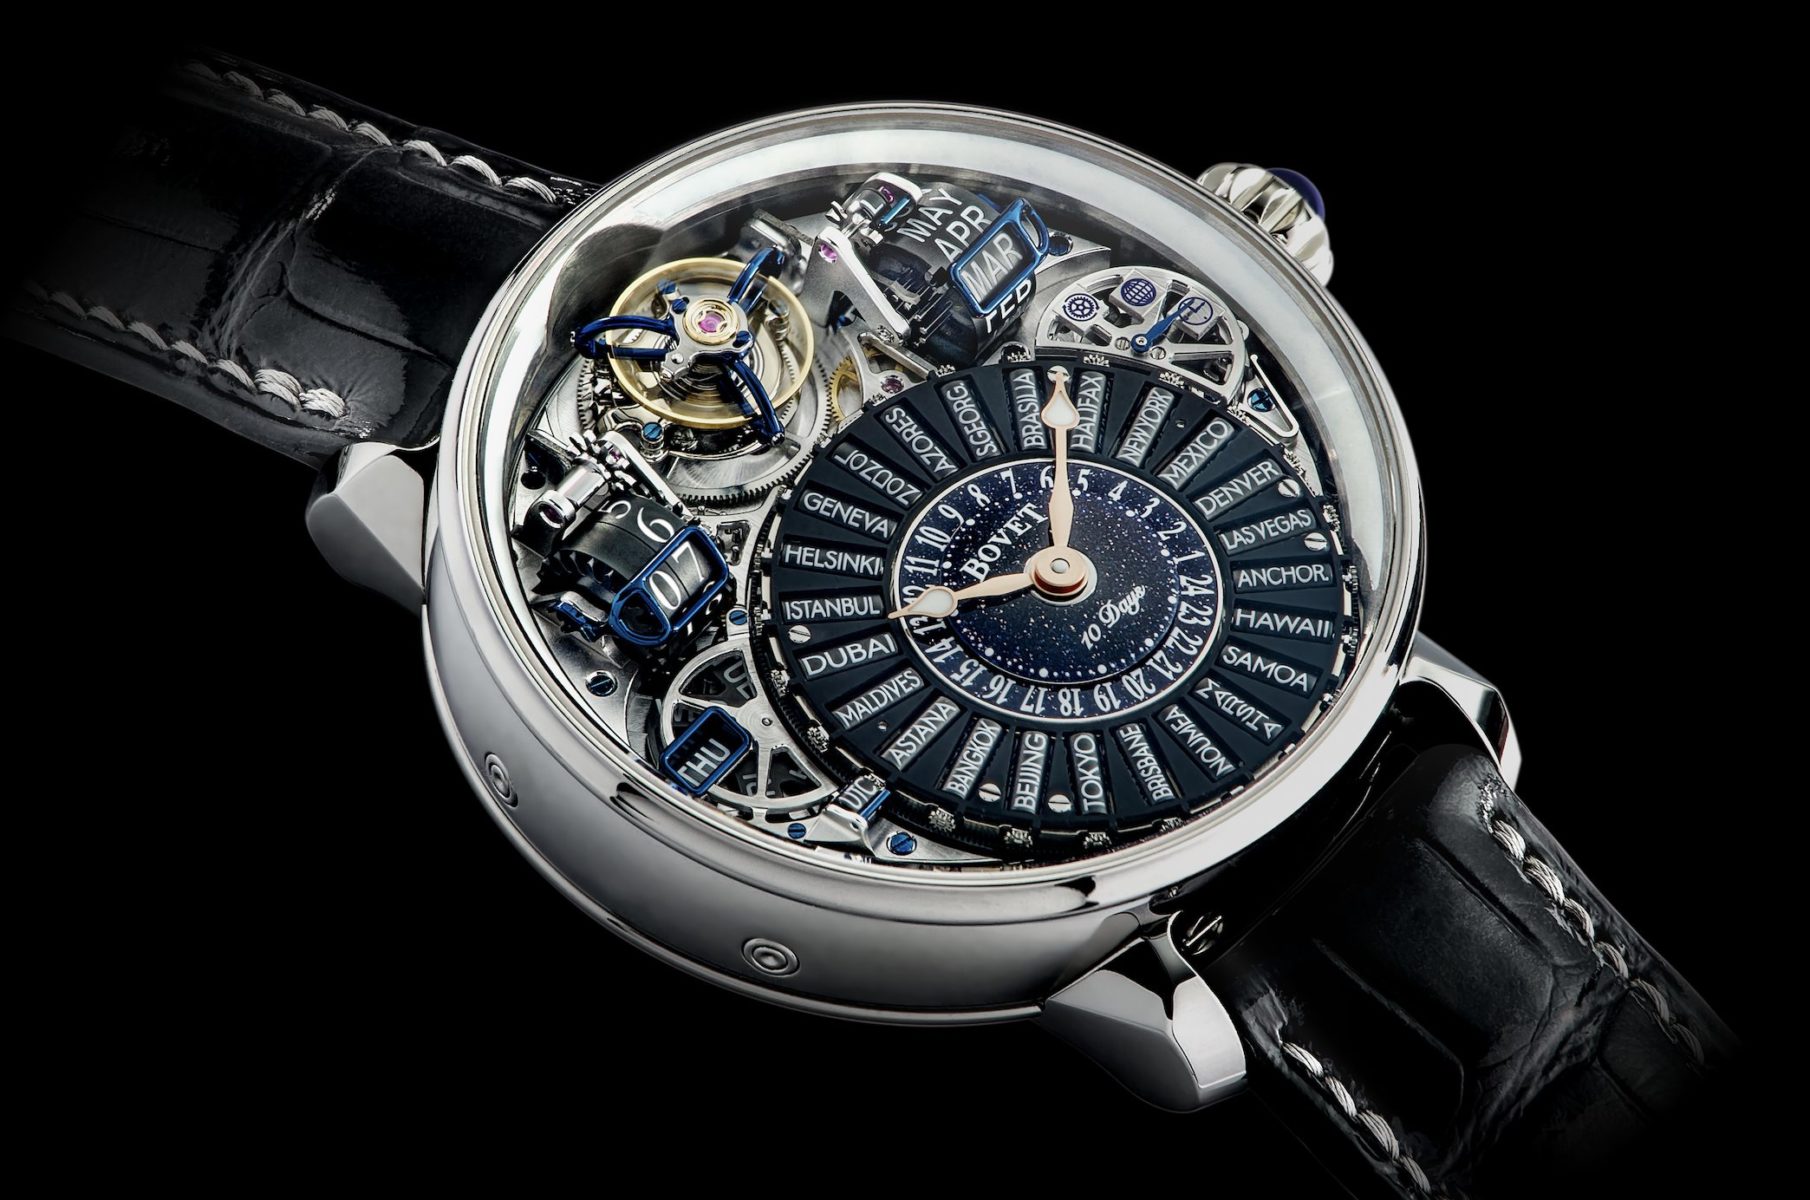 LUXURIA LIFESTYLE INTERNATIONAL WELCOMES BOVET WATCHES